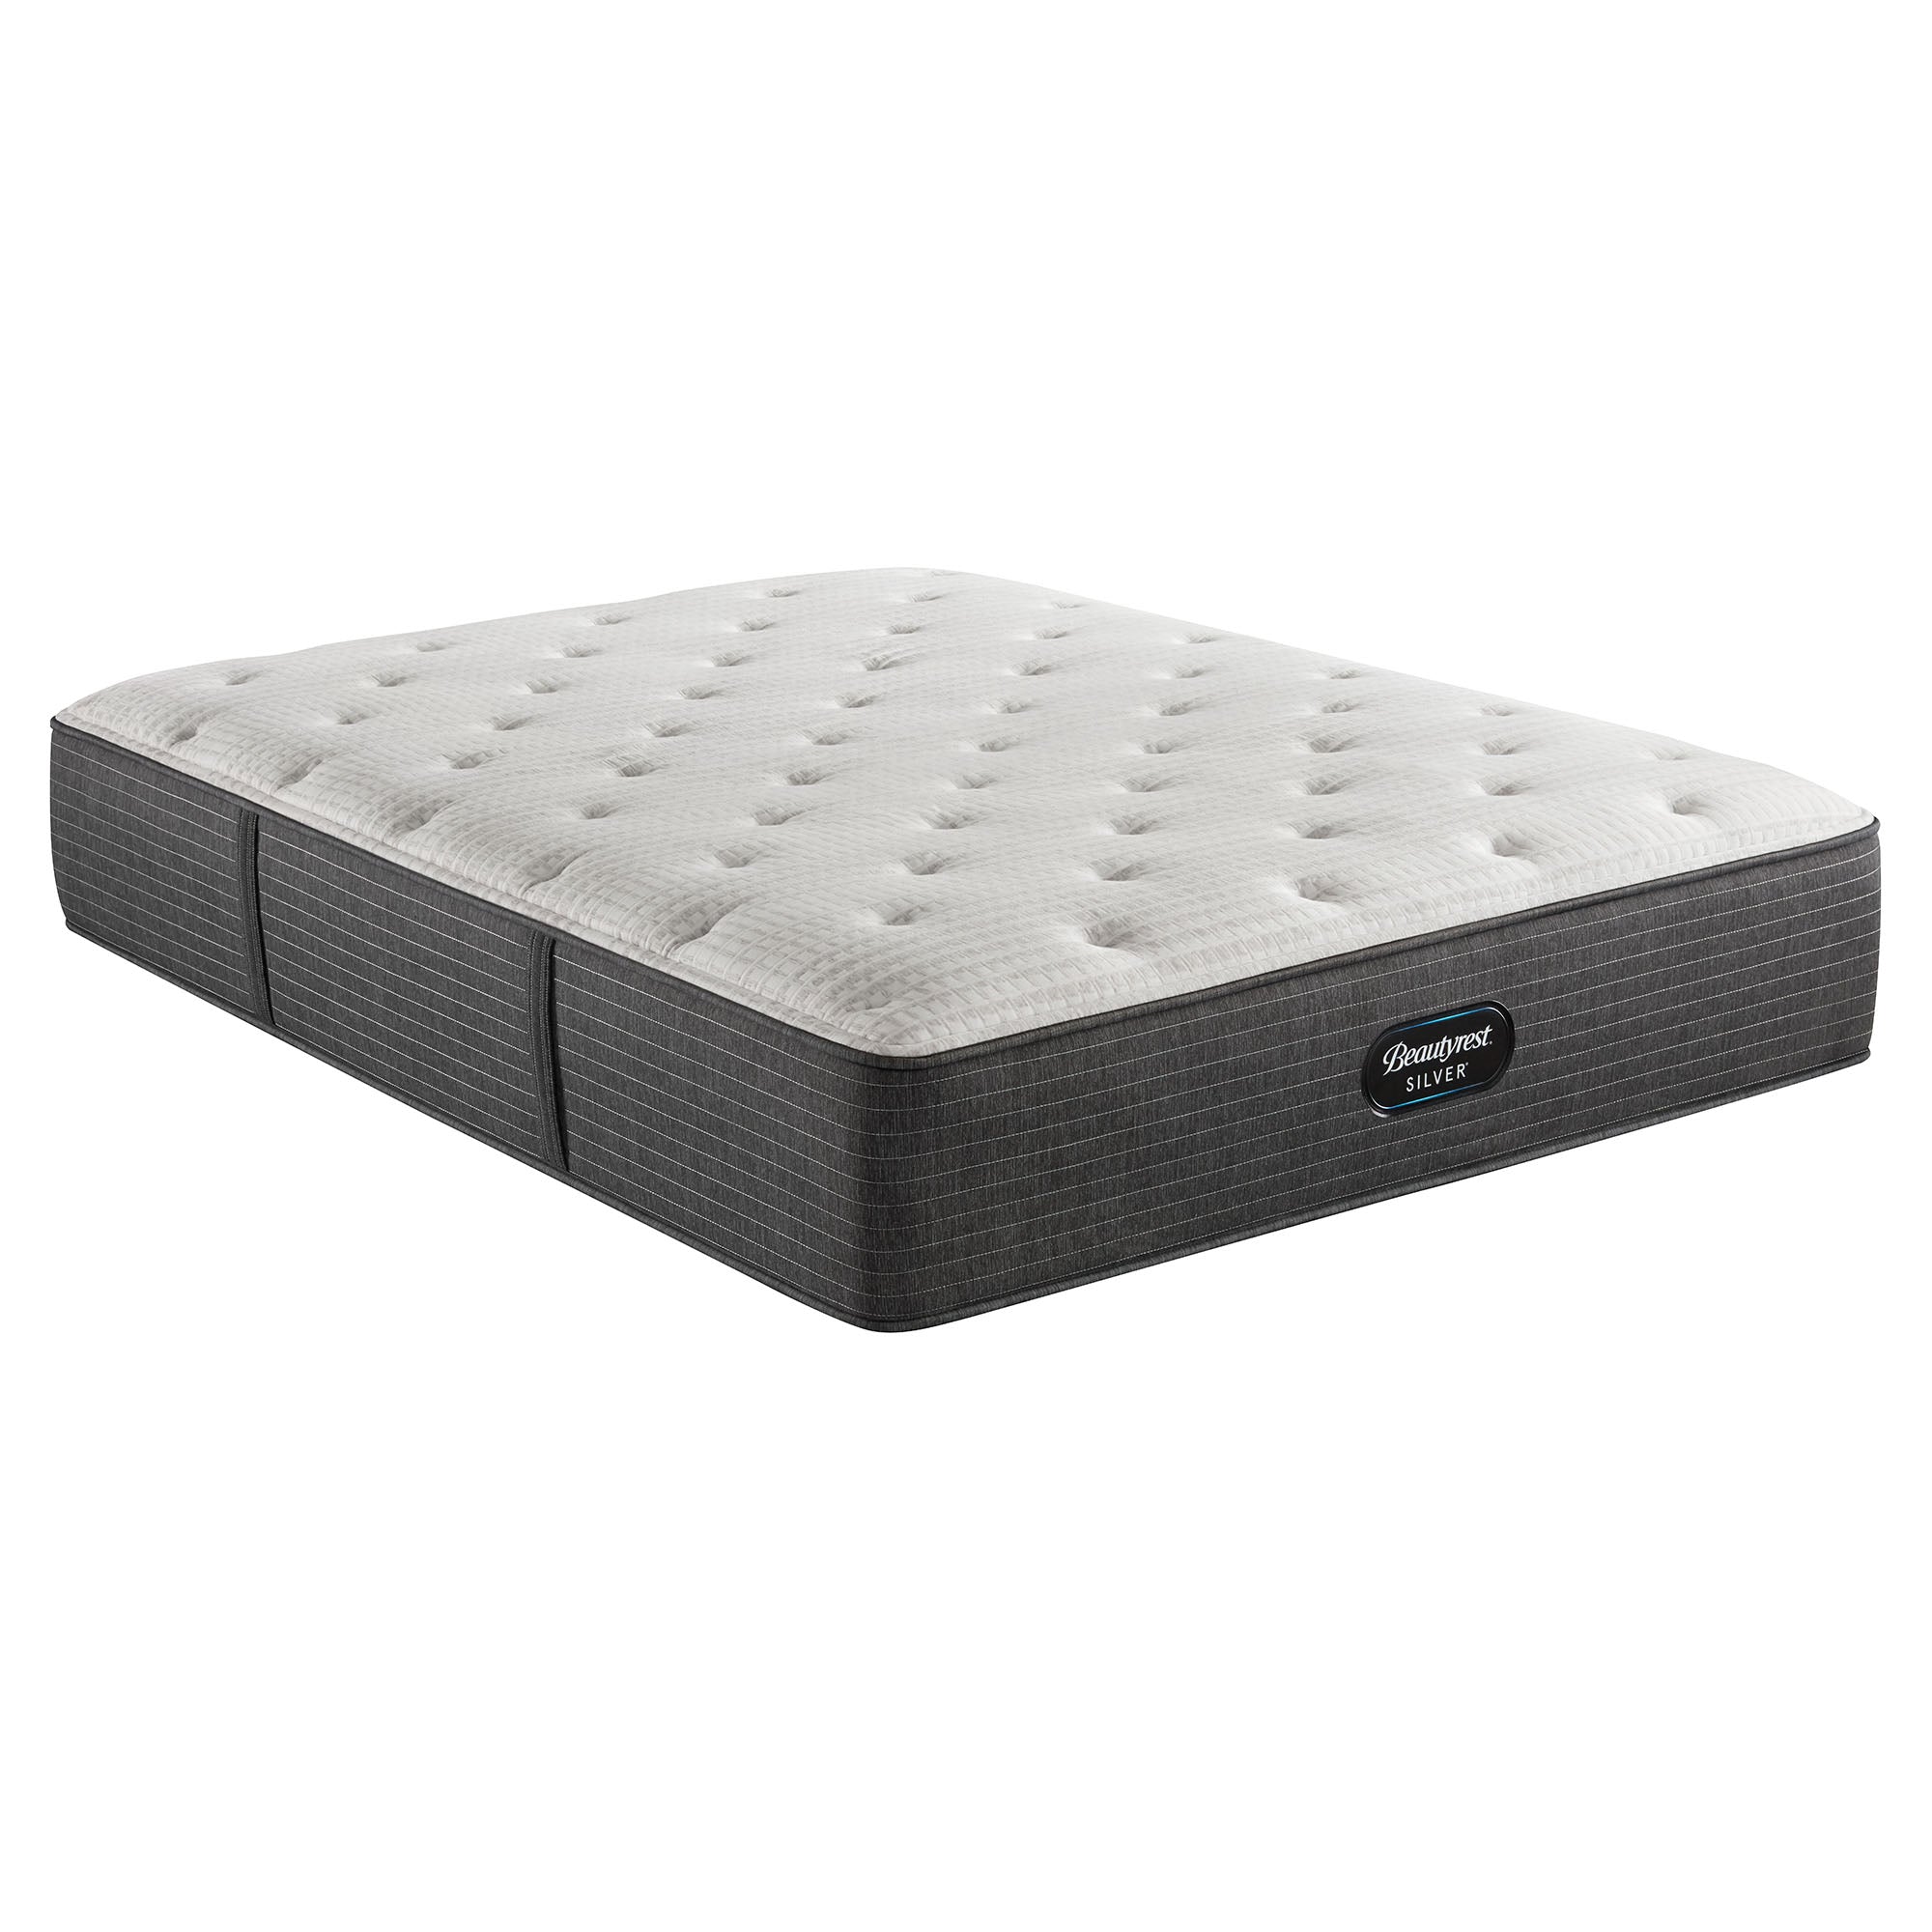 The Beautyrest Silver BRS900-C Plush mattress alone on a white background